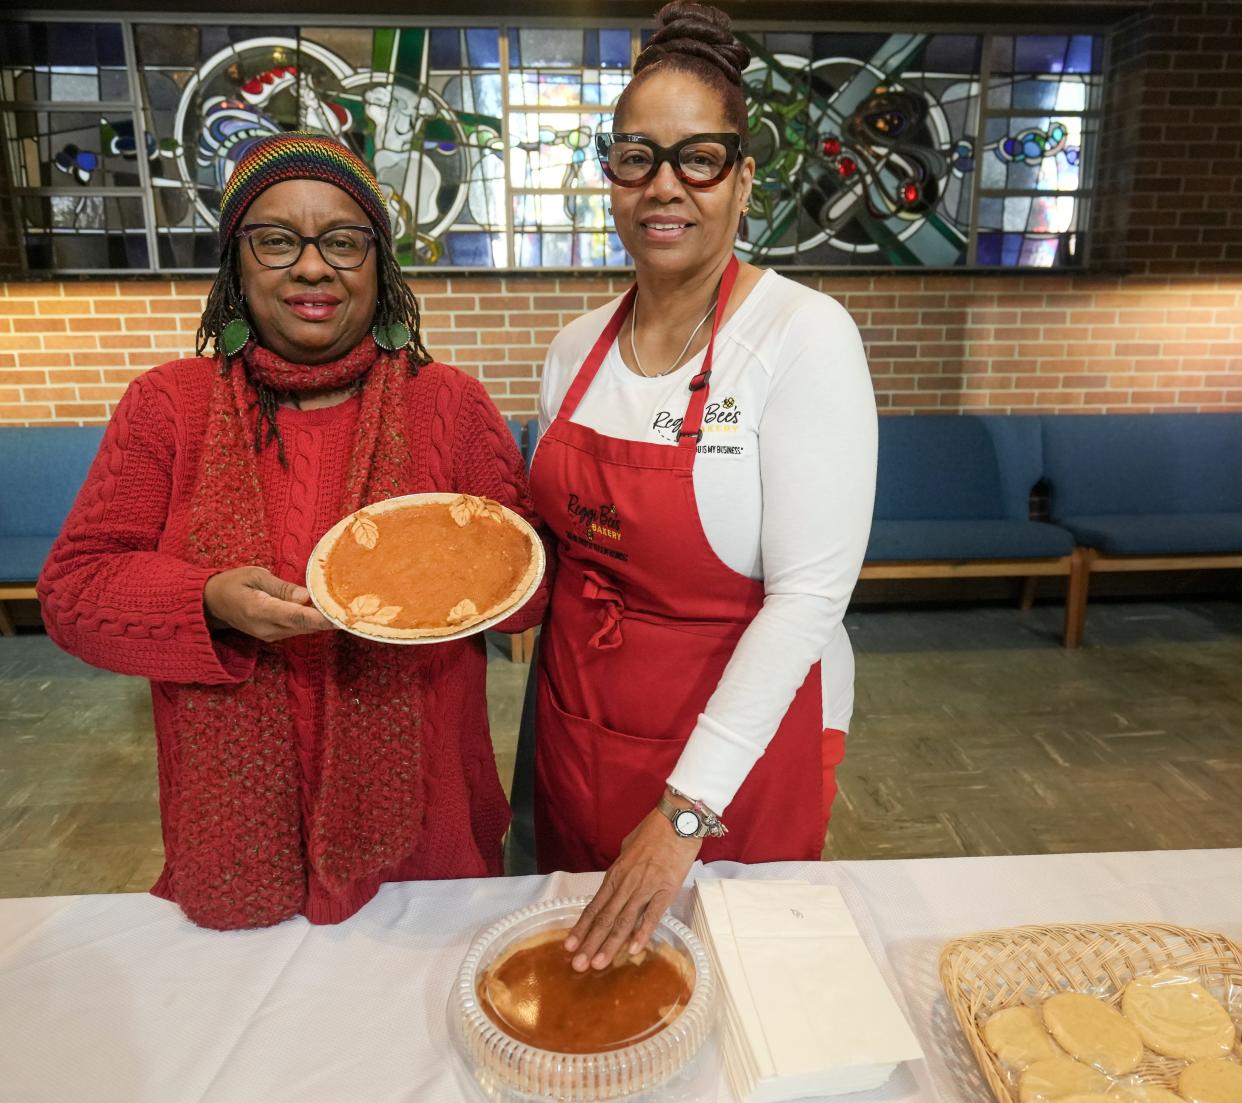 Venice Williams, left, and Neregin Ramsey, owner of Reggi Bee’s Bakery, show their pies Feb. 4 at The Table,  5305 W. Capitol Drive. Williams runs The Table's indoor Winter Farmers Market, and she planned a sweet potato pie contest Feb. 18. Ramsey, who is one of the contestants, keeps her mother’s recipes alive. “It’s a little legacy there; I enjoy seeing people smile when they eat my food. I enjoy cooking,” she expressed. “It’s not quantity, it is quality. When you cook with love in it (the food), you get the right response back.”